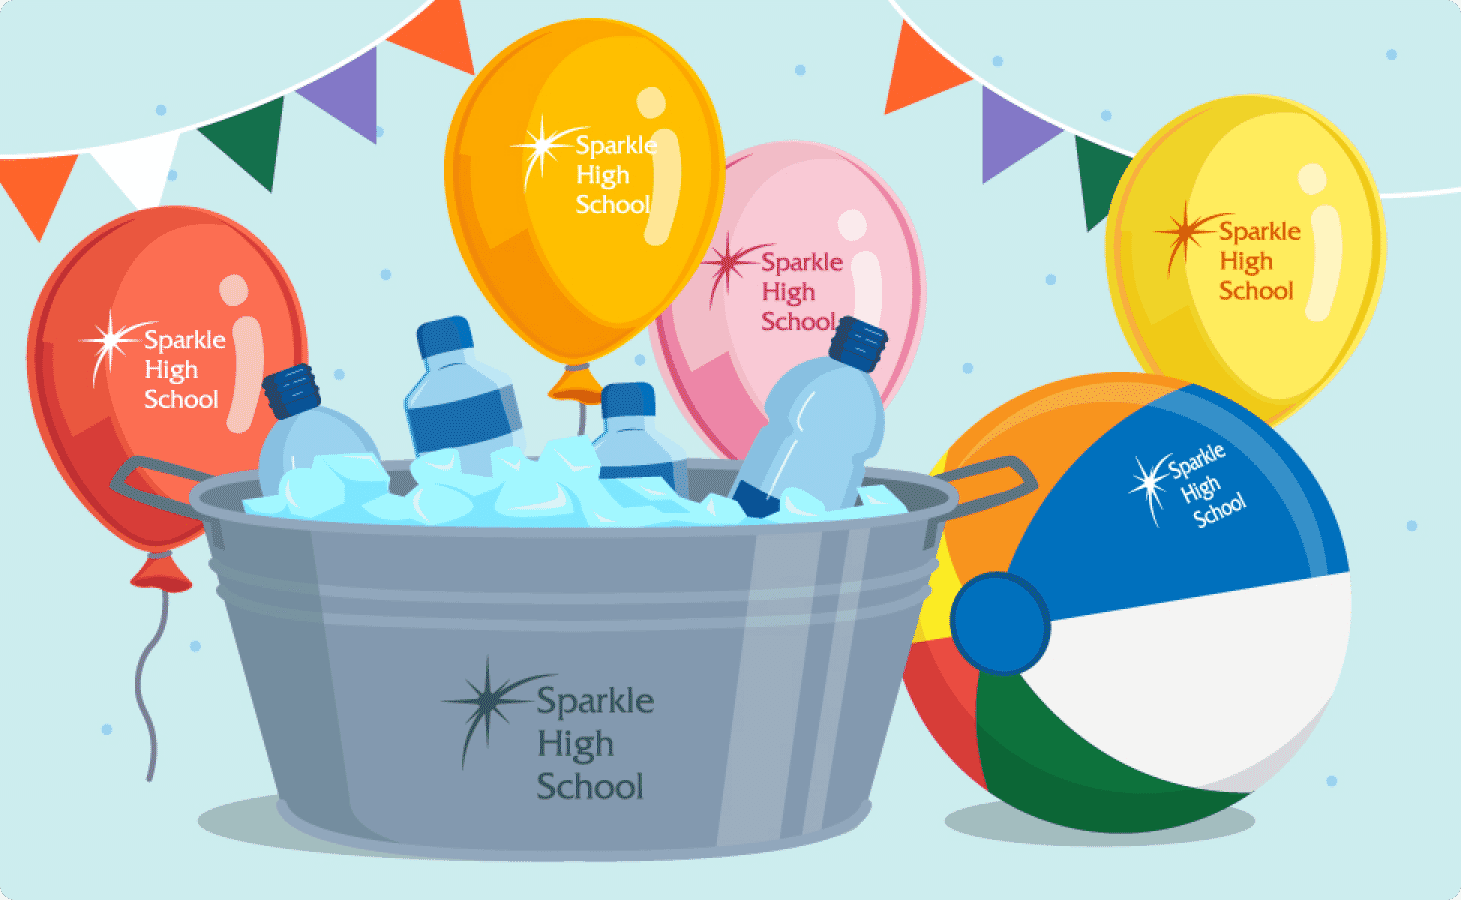 Pump Them Up by Throwing a Back-to-School Party